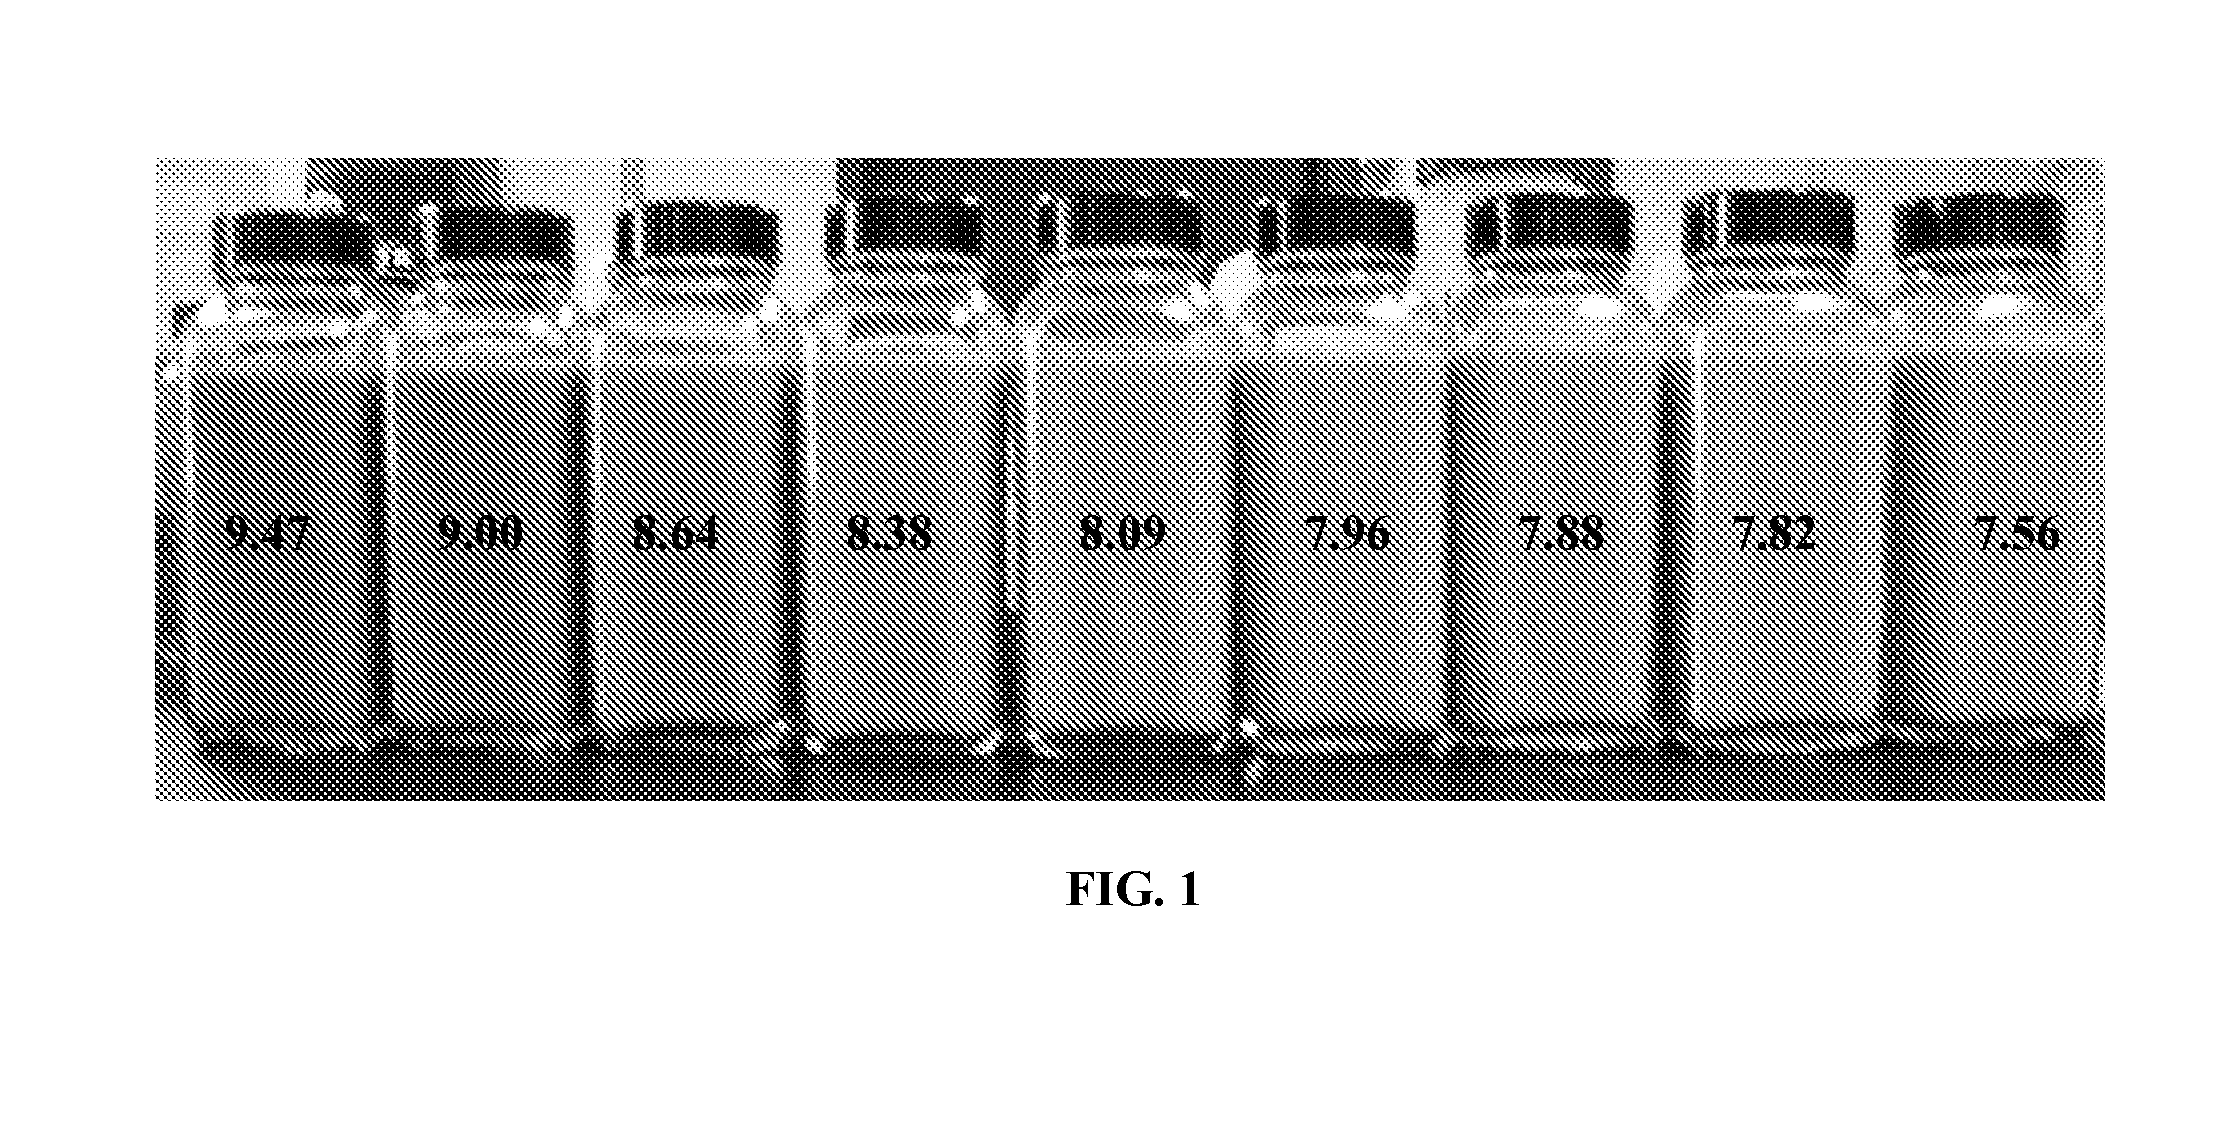 Metal working fluid composition and method of detecting fluid deterioration